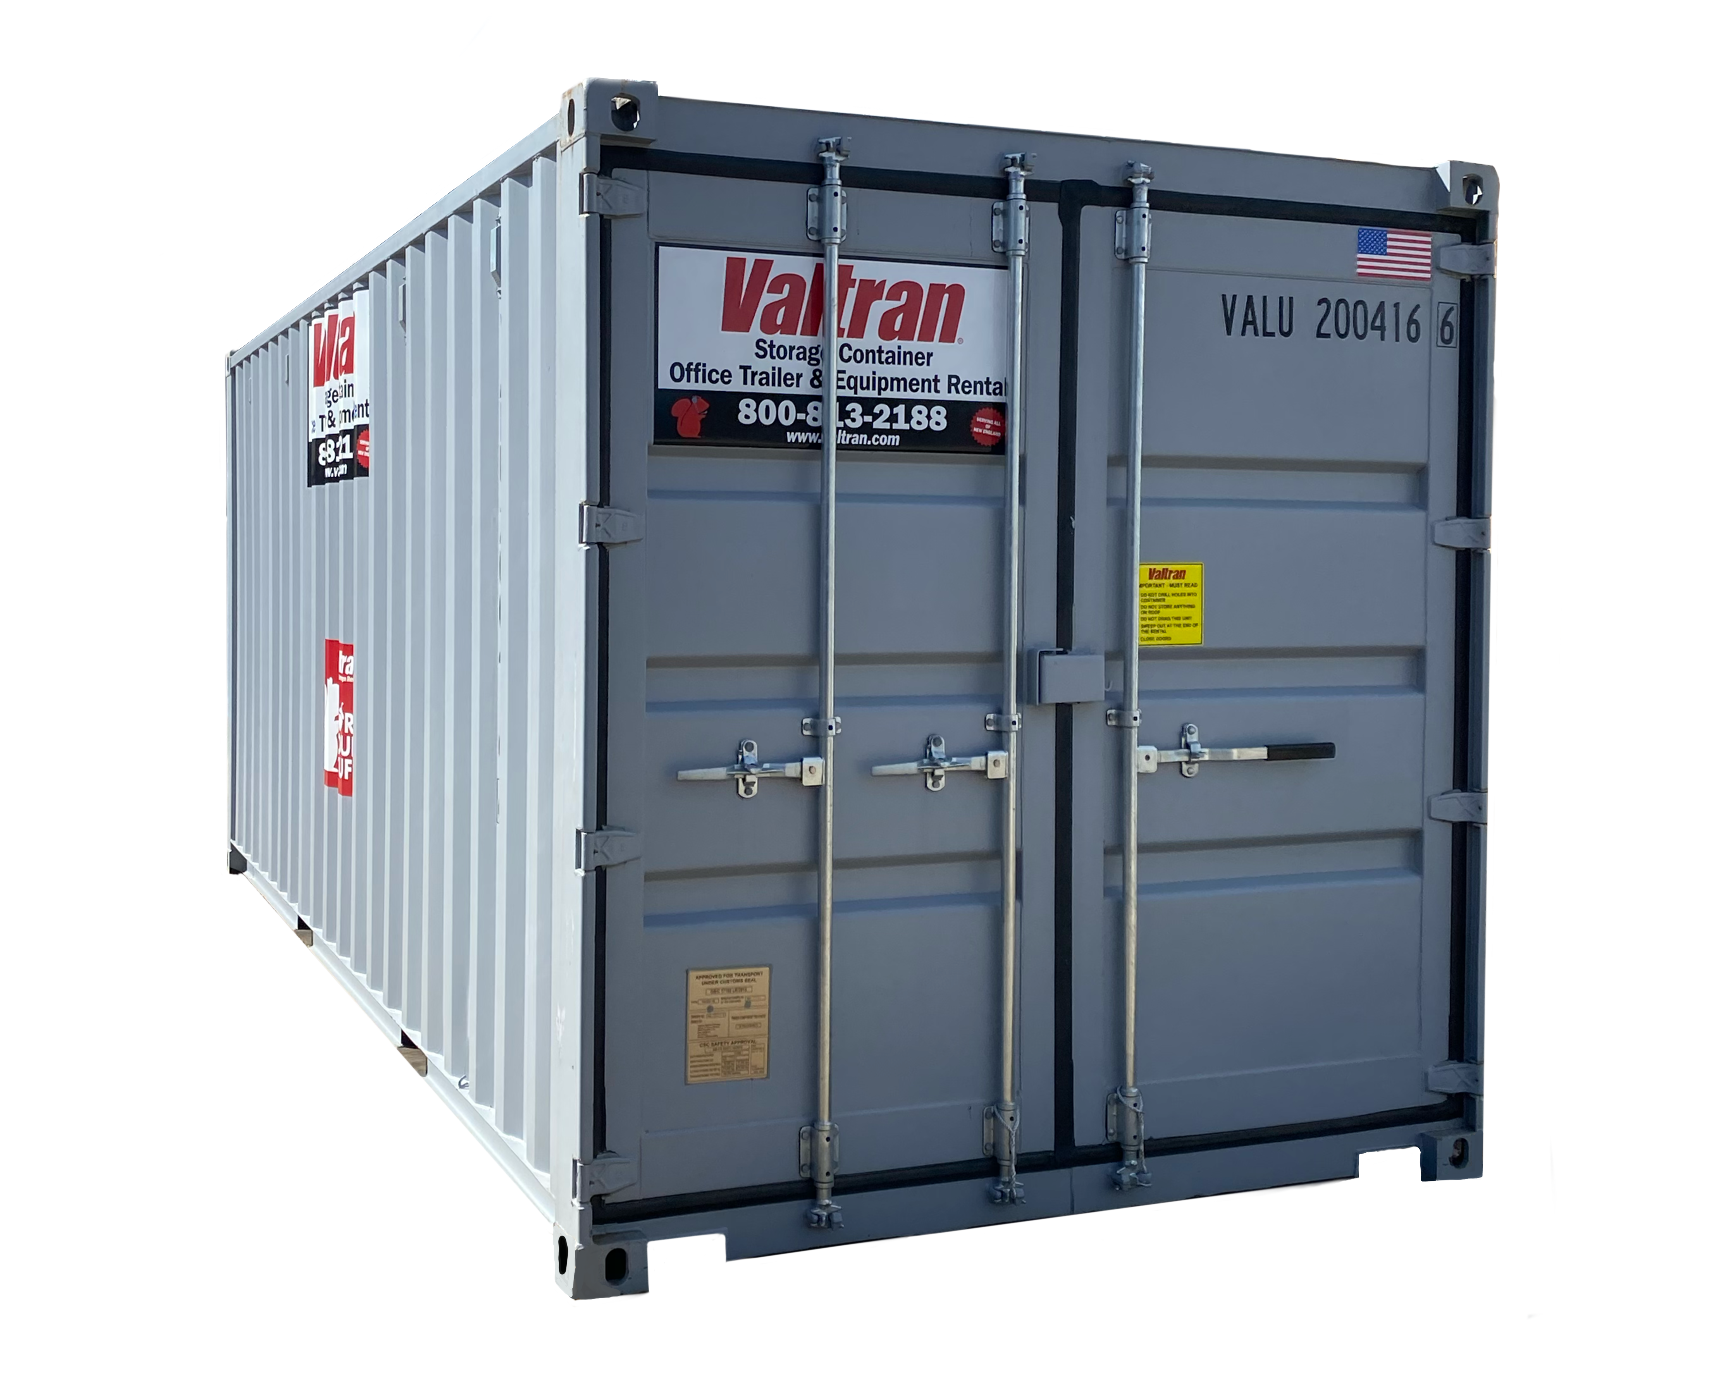 20' storage container with corrugated metal walls and double doors, suitable for secure storage of equipment, furniture, or other large items